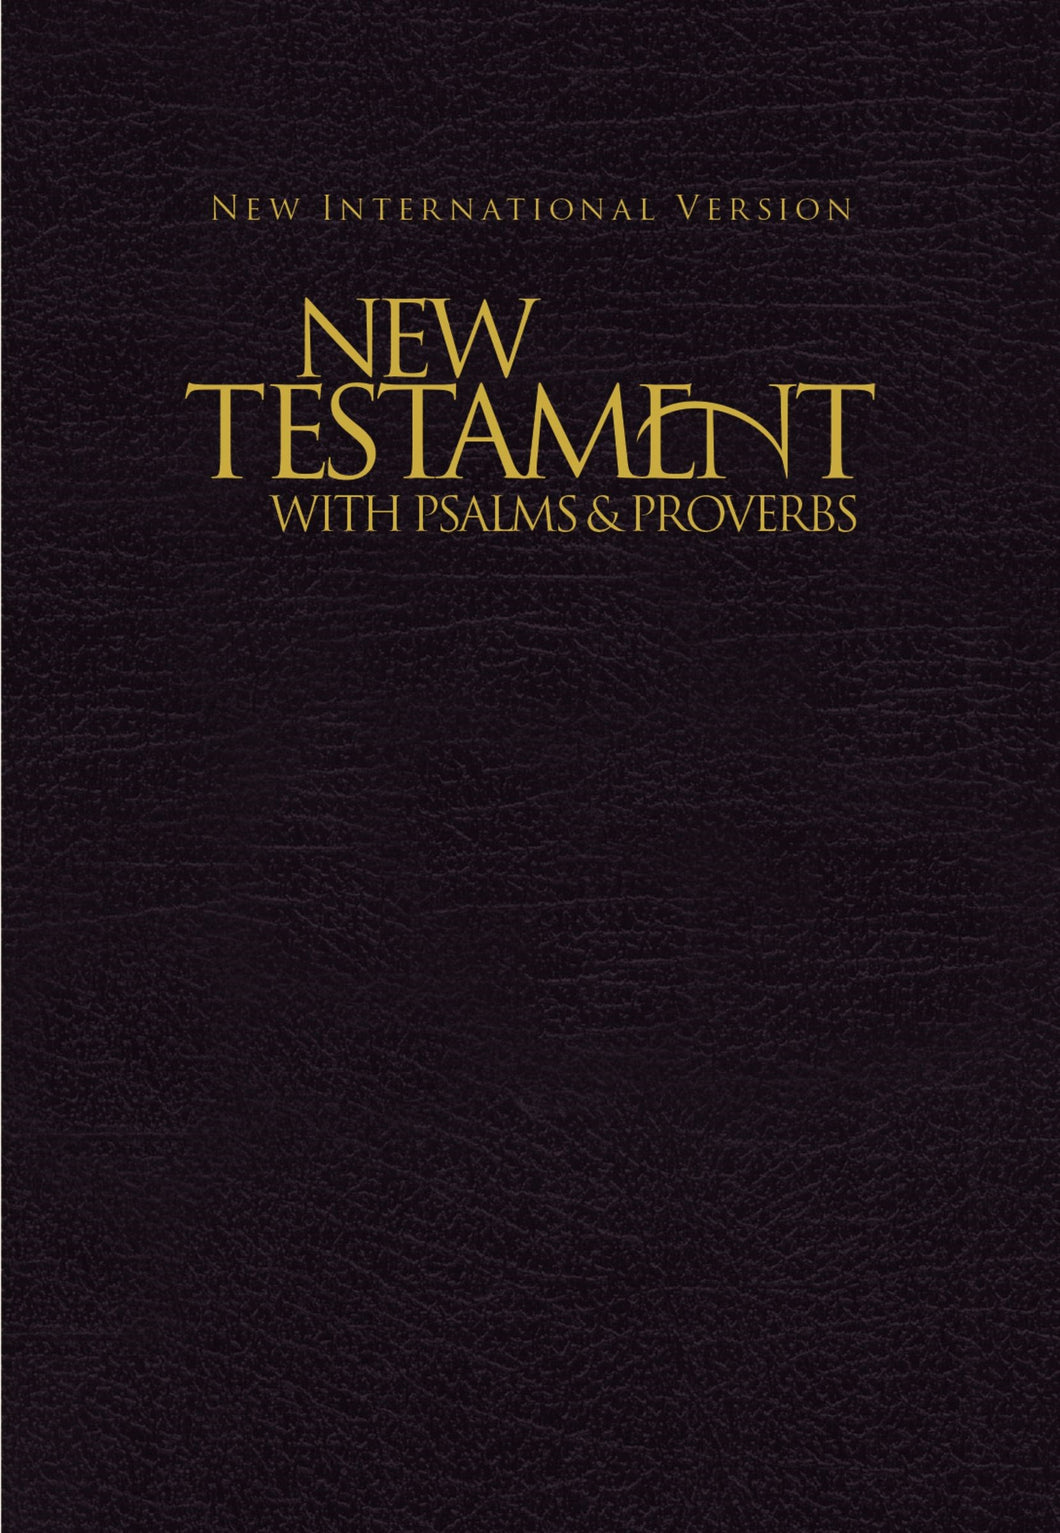 NIV New Testament With Psalms And Proverbs-Black Softcover